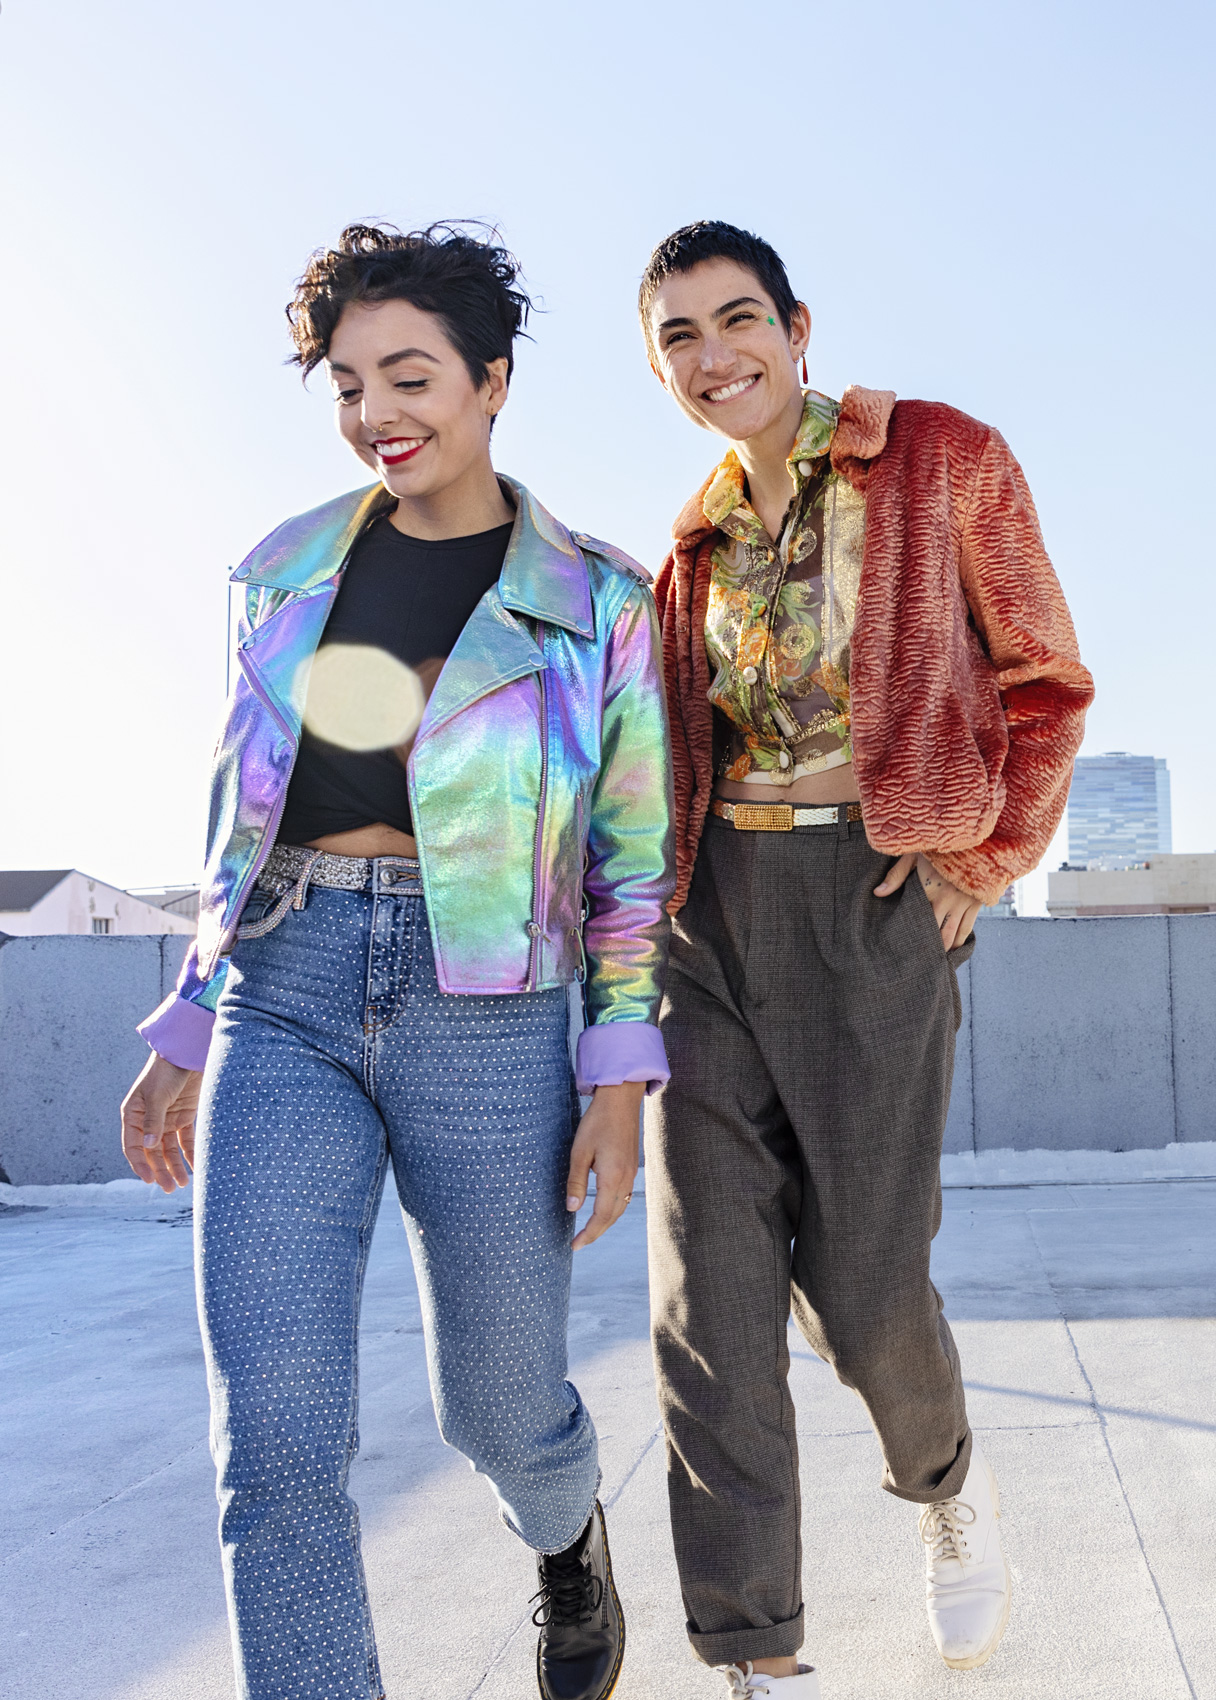 LGBTQ youth walking together on a city roof